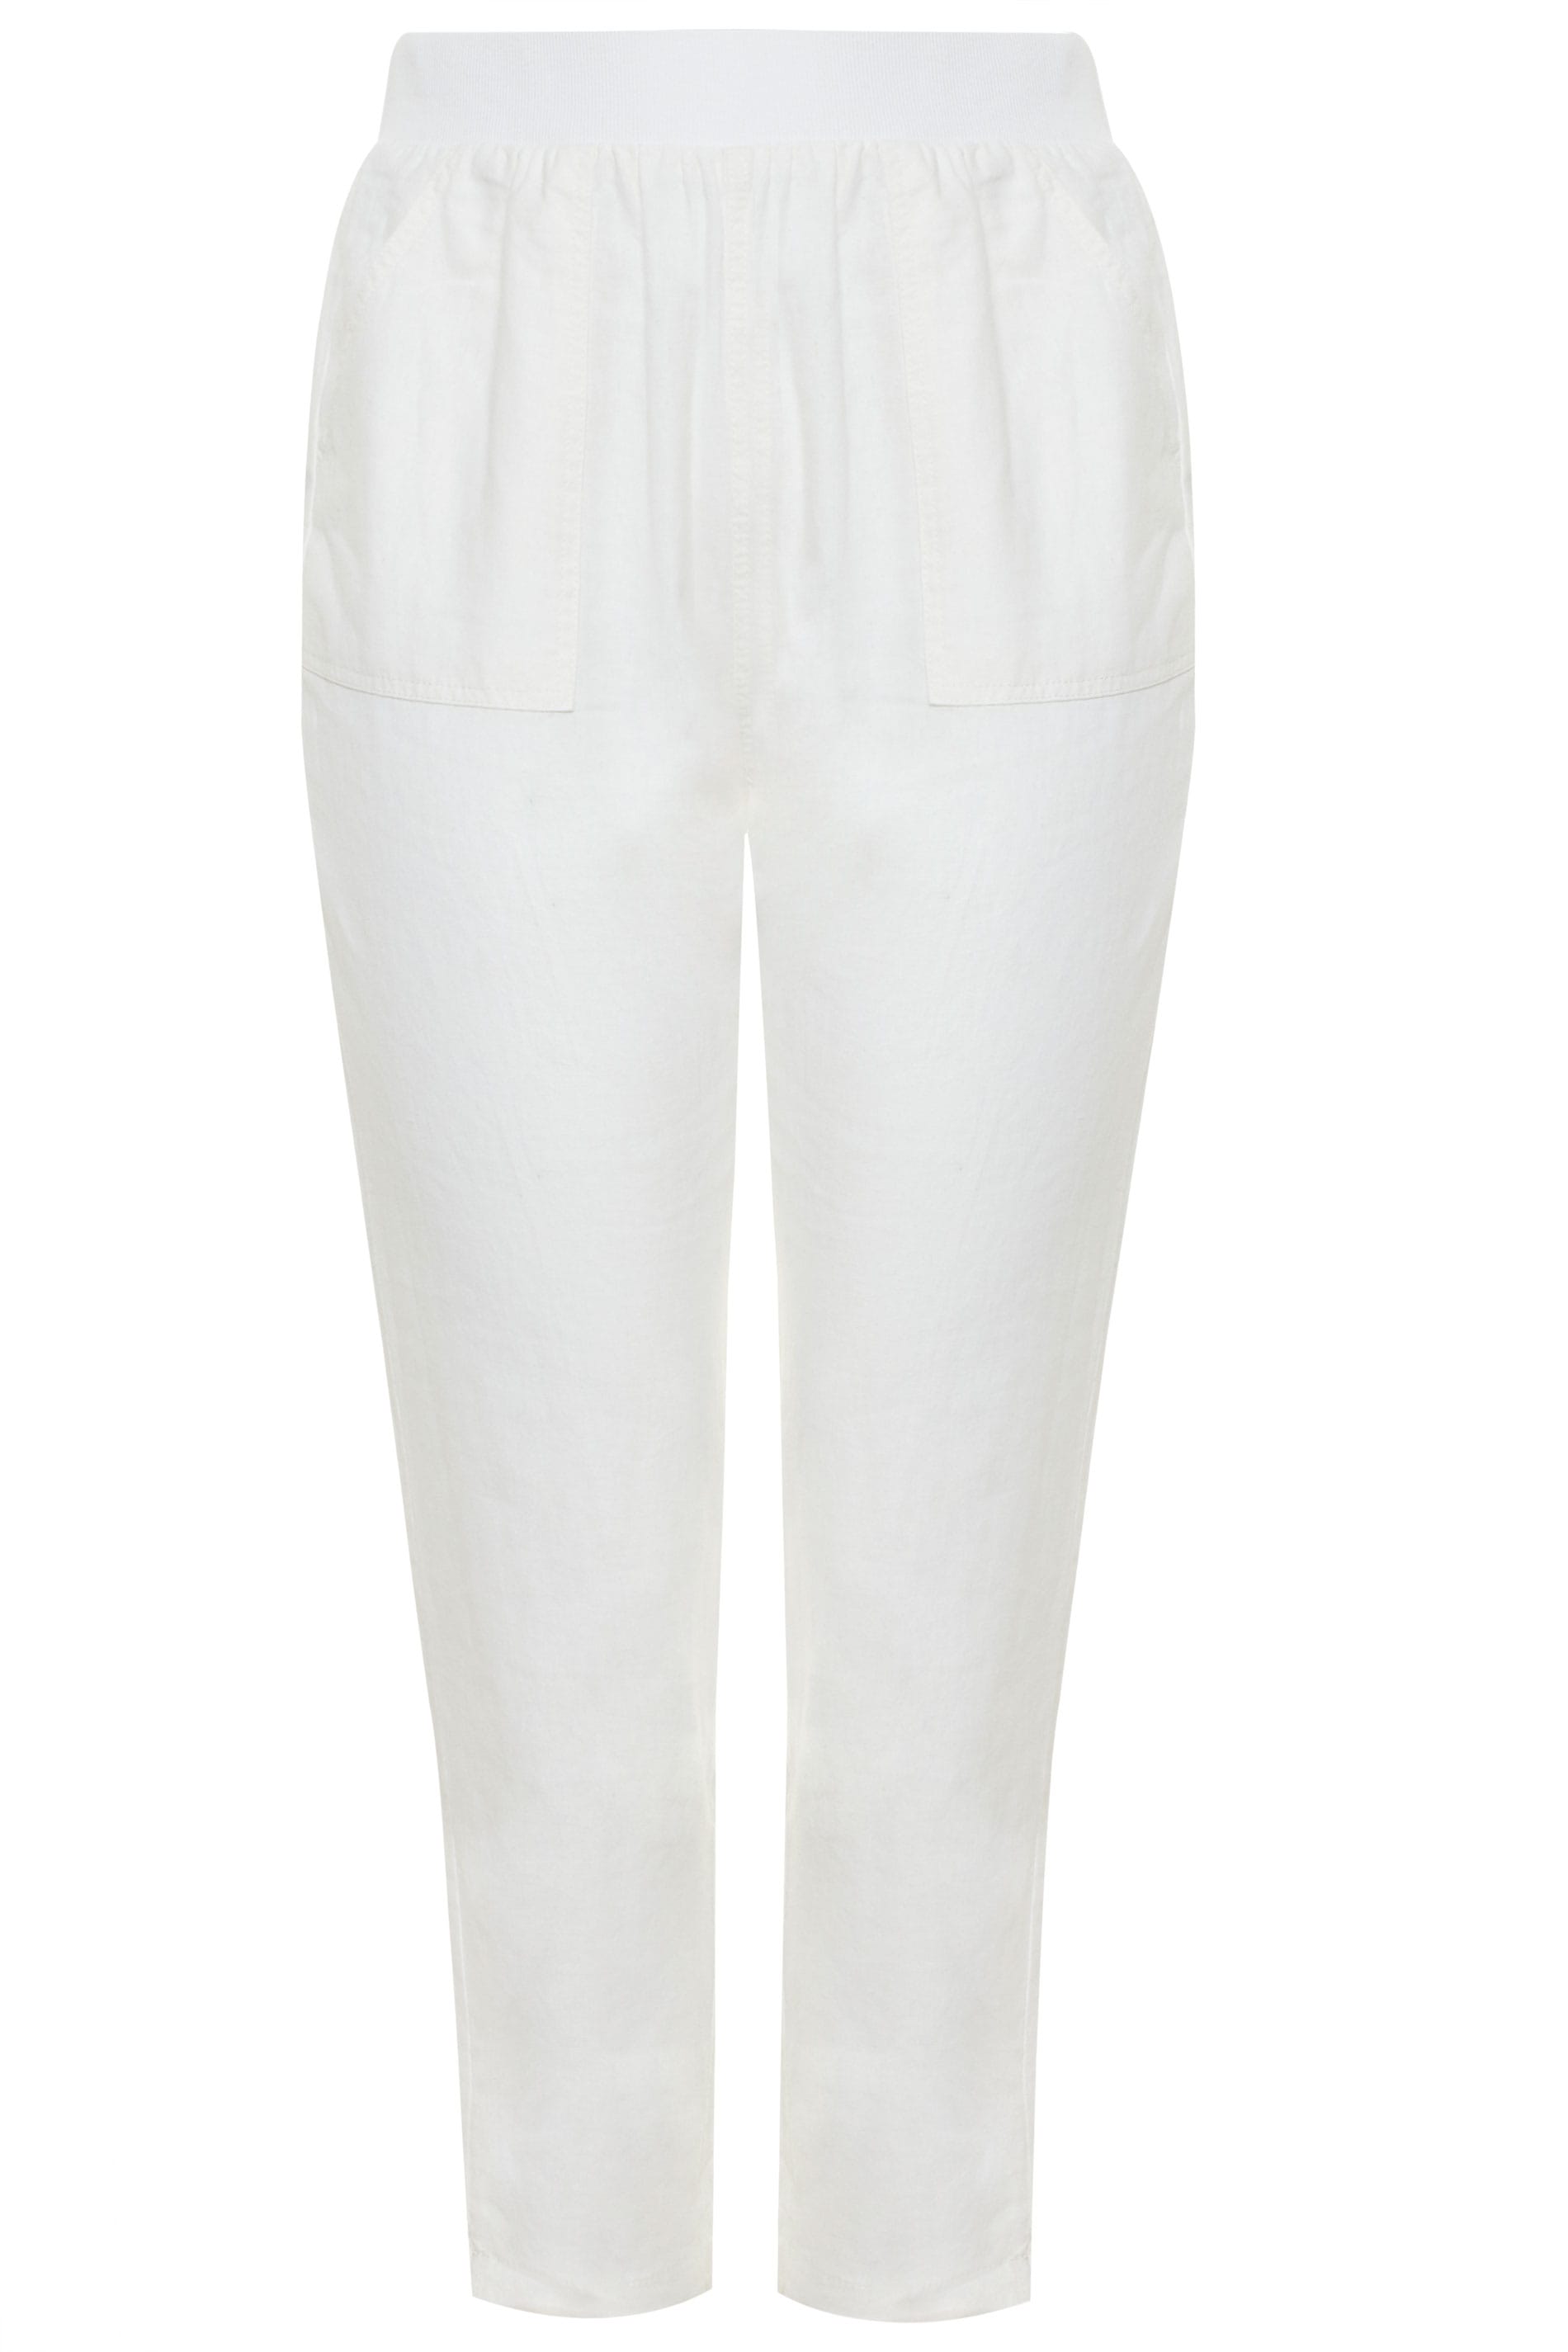 White Linen Tapered Trousers | Yours Clothing